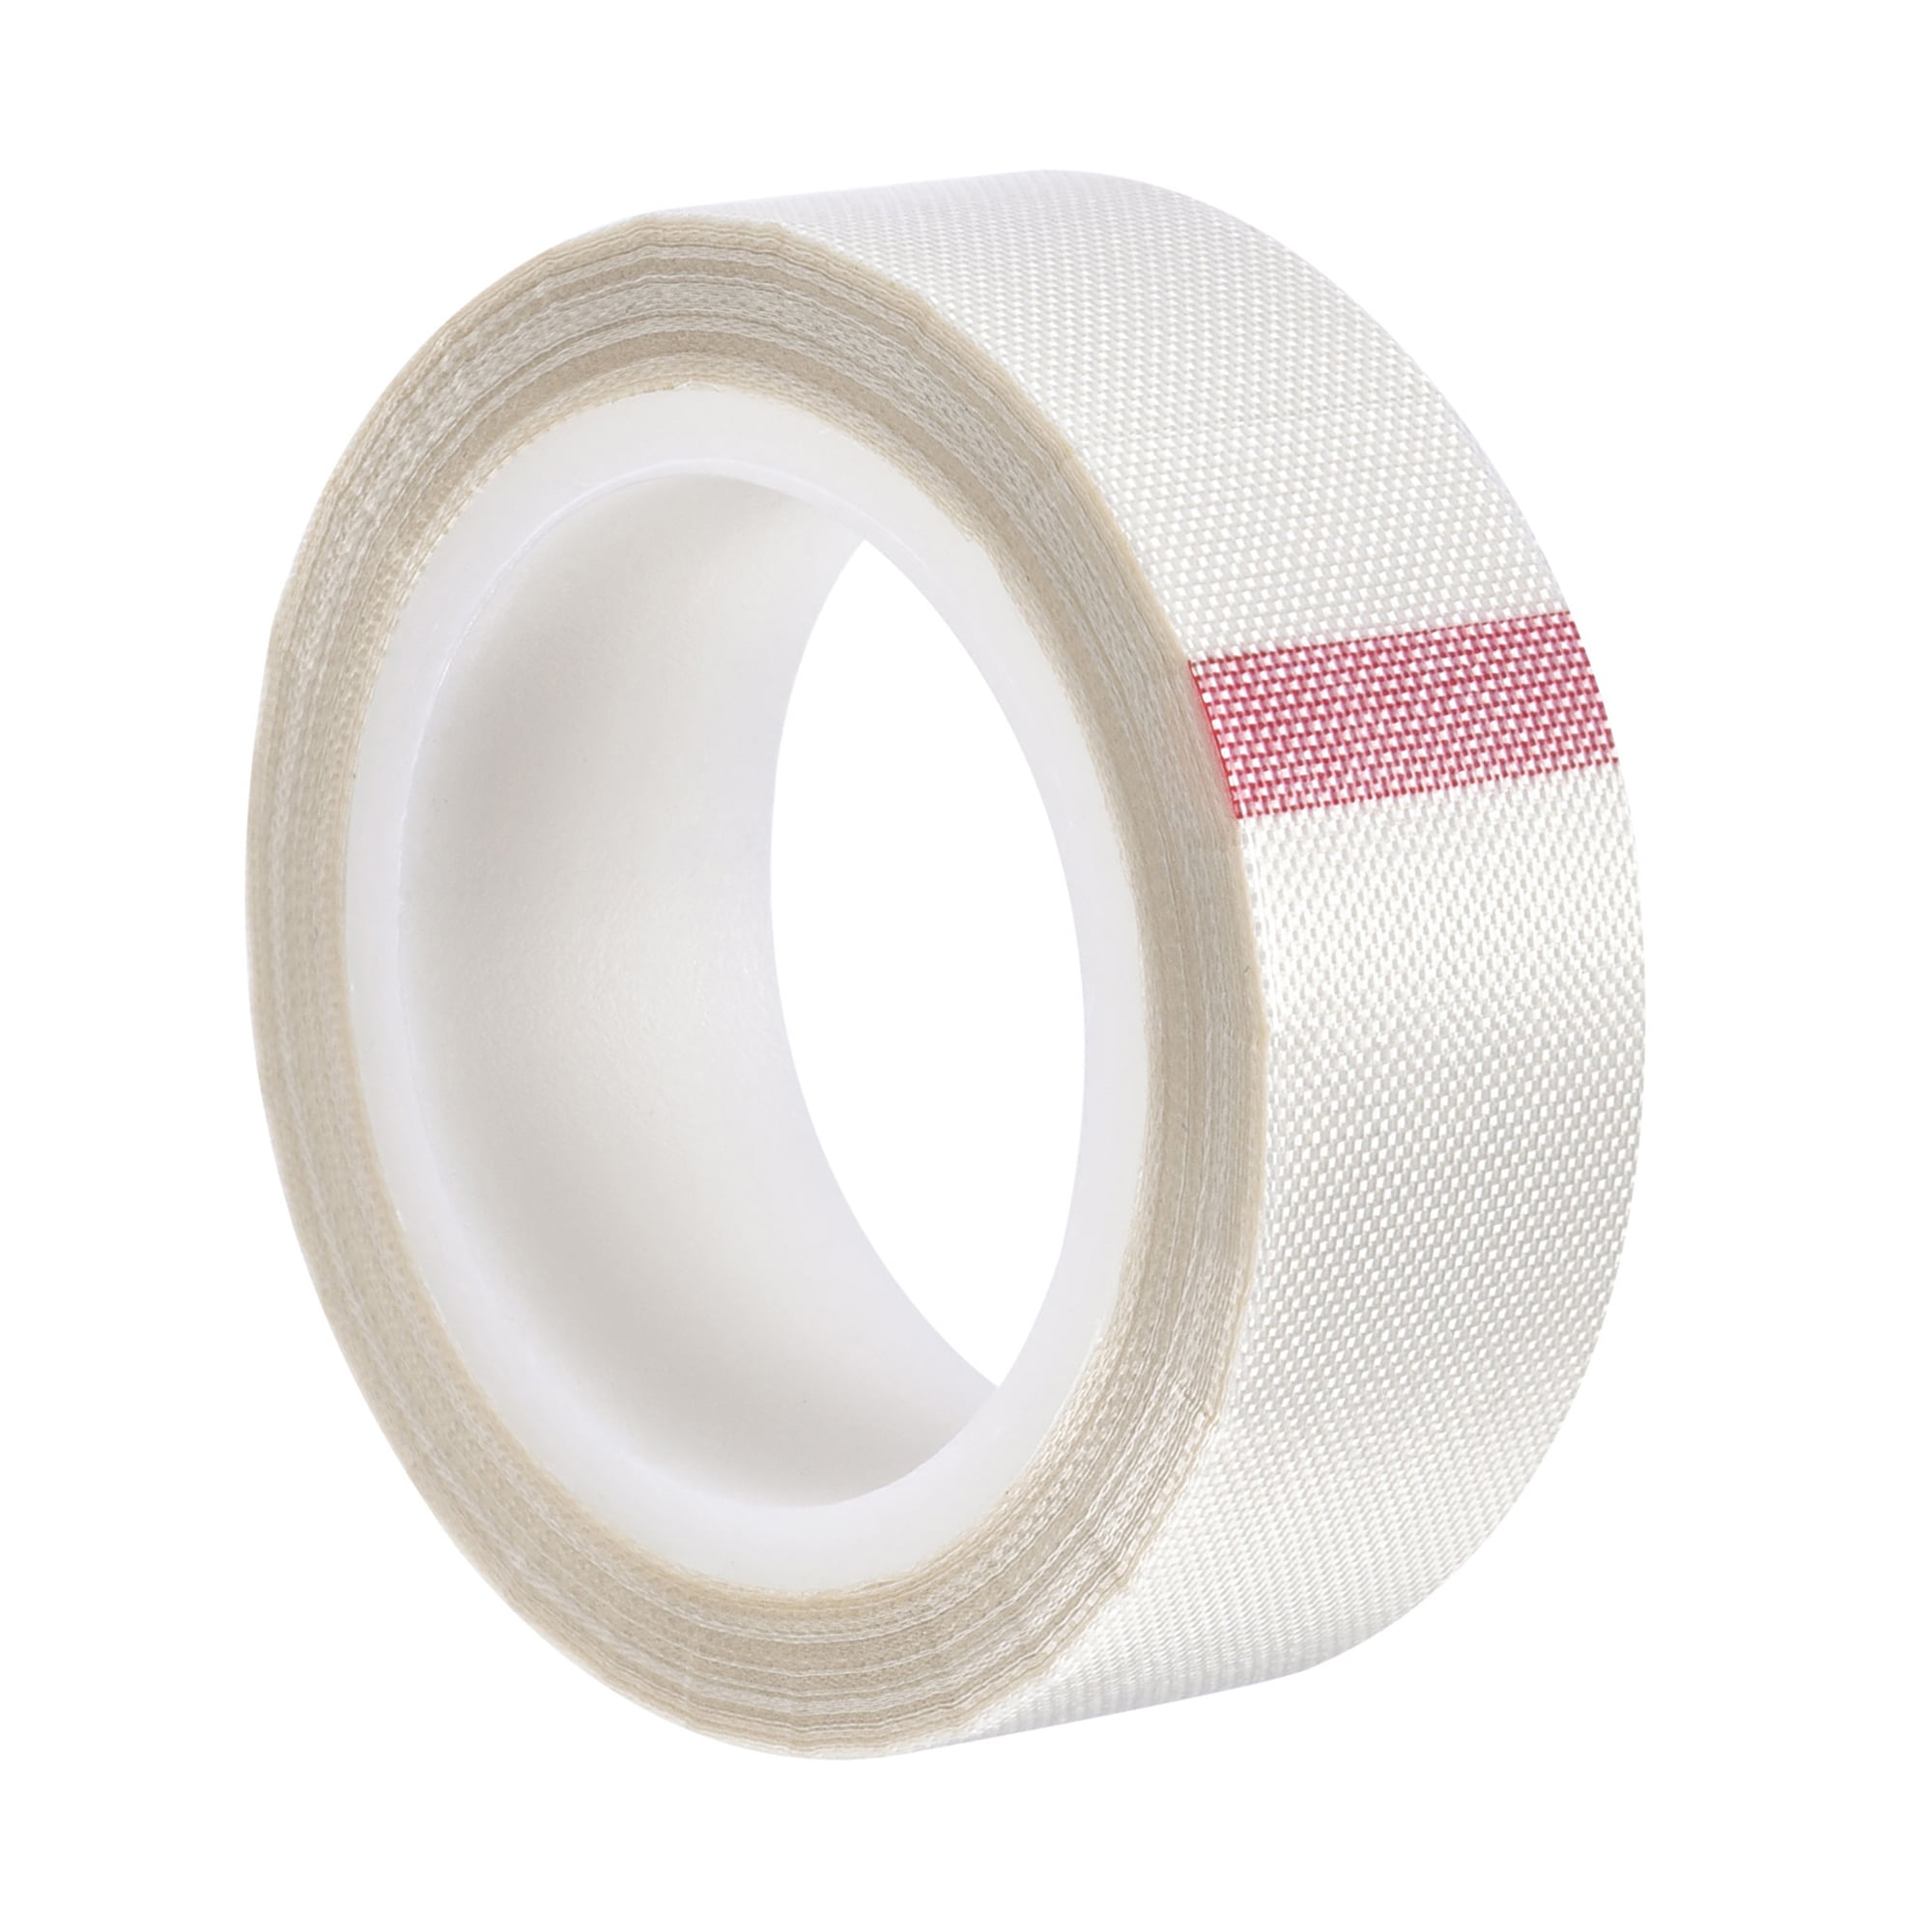 Uxcell Heat Resistant Tape High Temperature Tape PTFE Film Adhesive Tape 25mm Width 10M 33ft Long Brown, Size: 25 mm